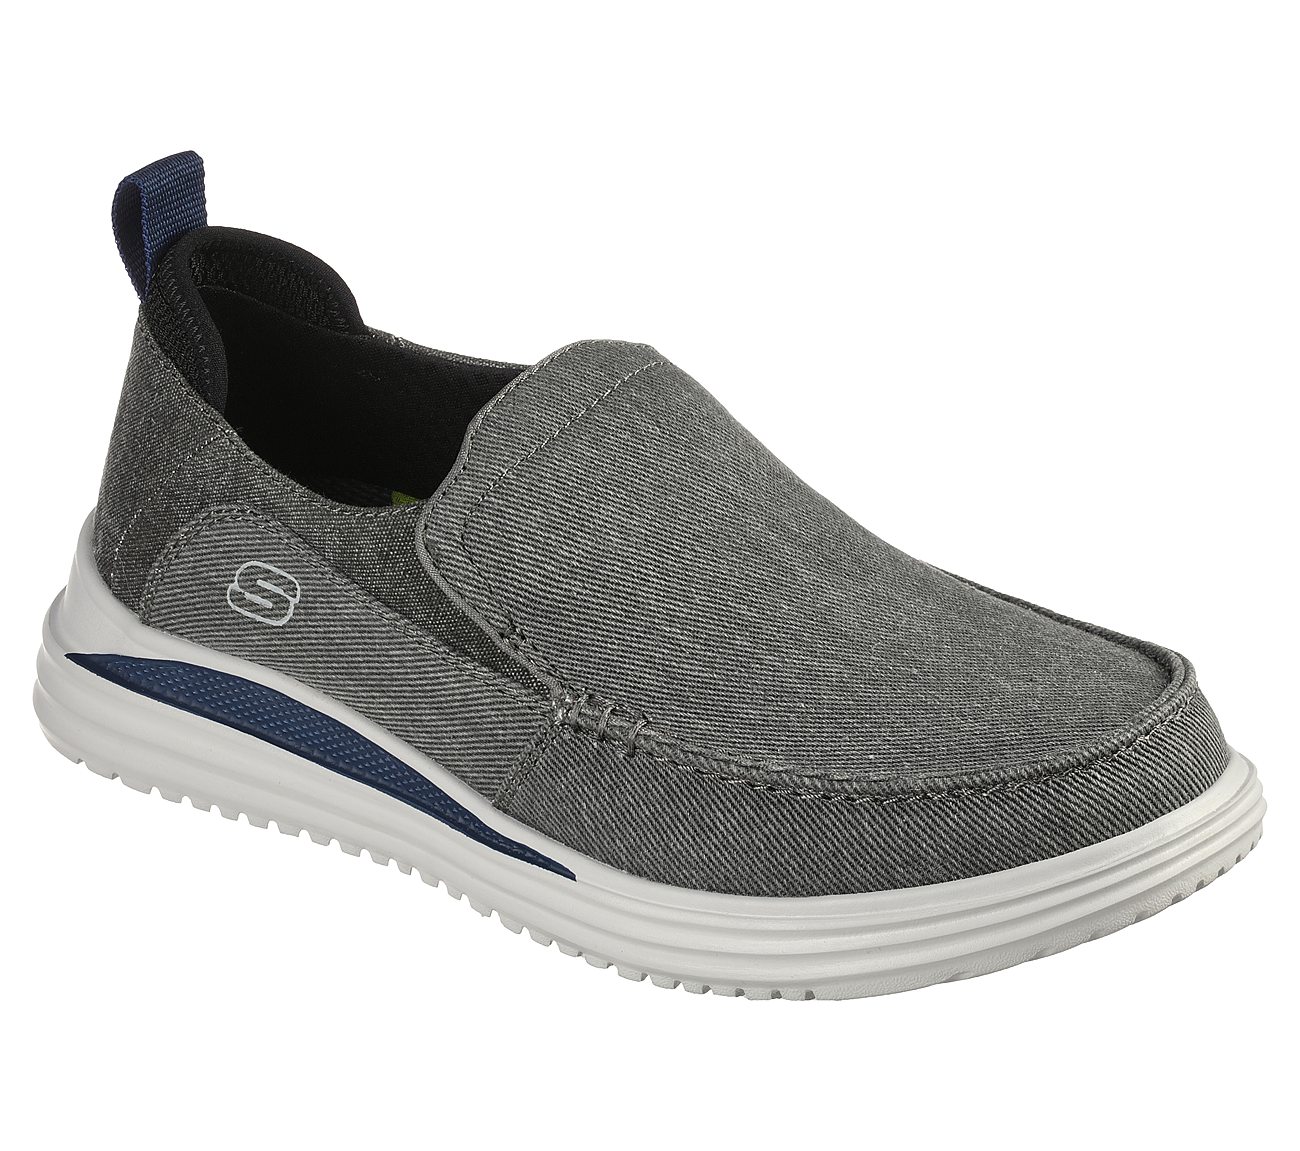 PROVEN - EVERS, CCHARCOAL Footwear Right View